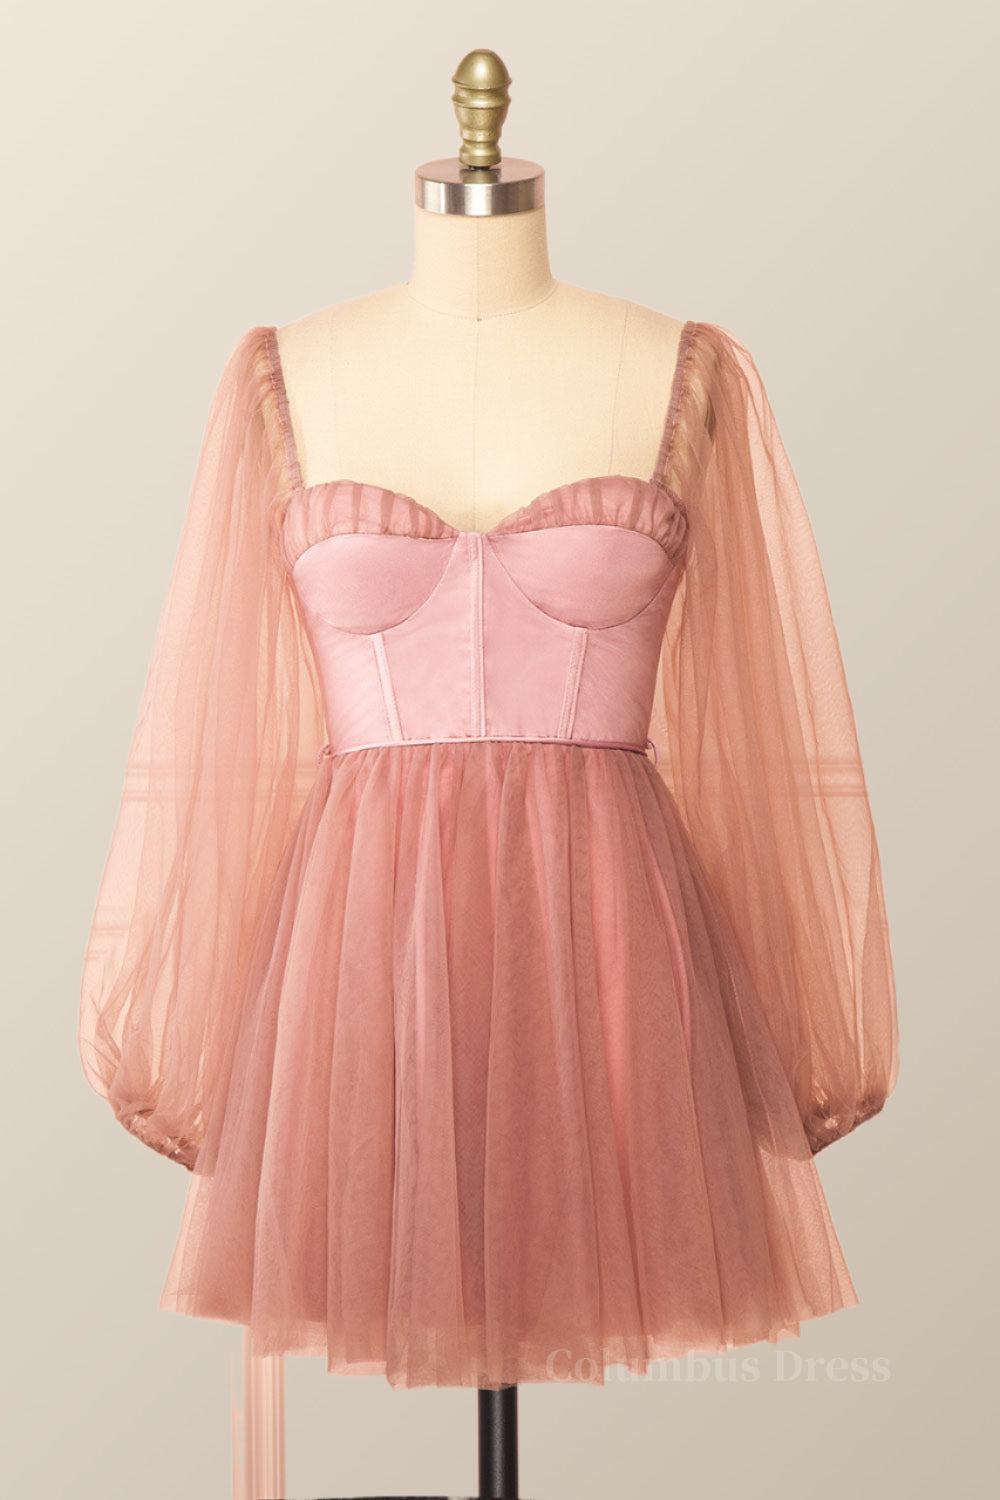 Prom Dresses Ball Gown Style, Puffy Long Sleeves Blush Pink Corset Short Dress